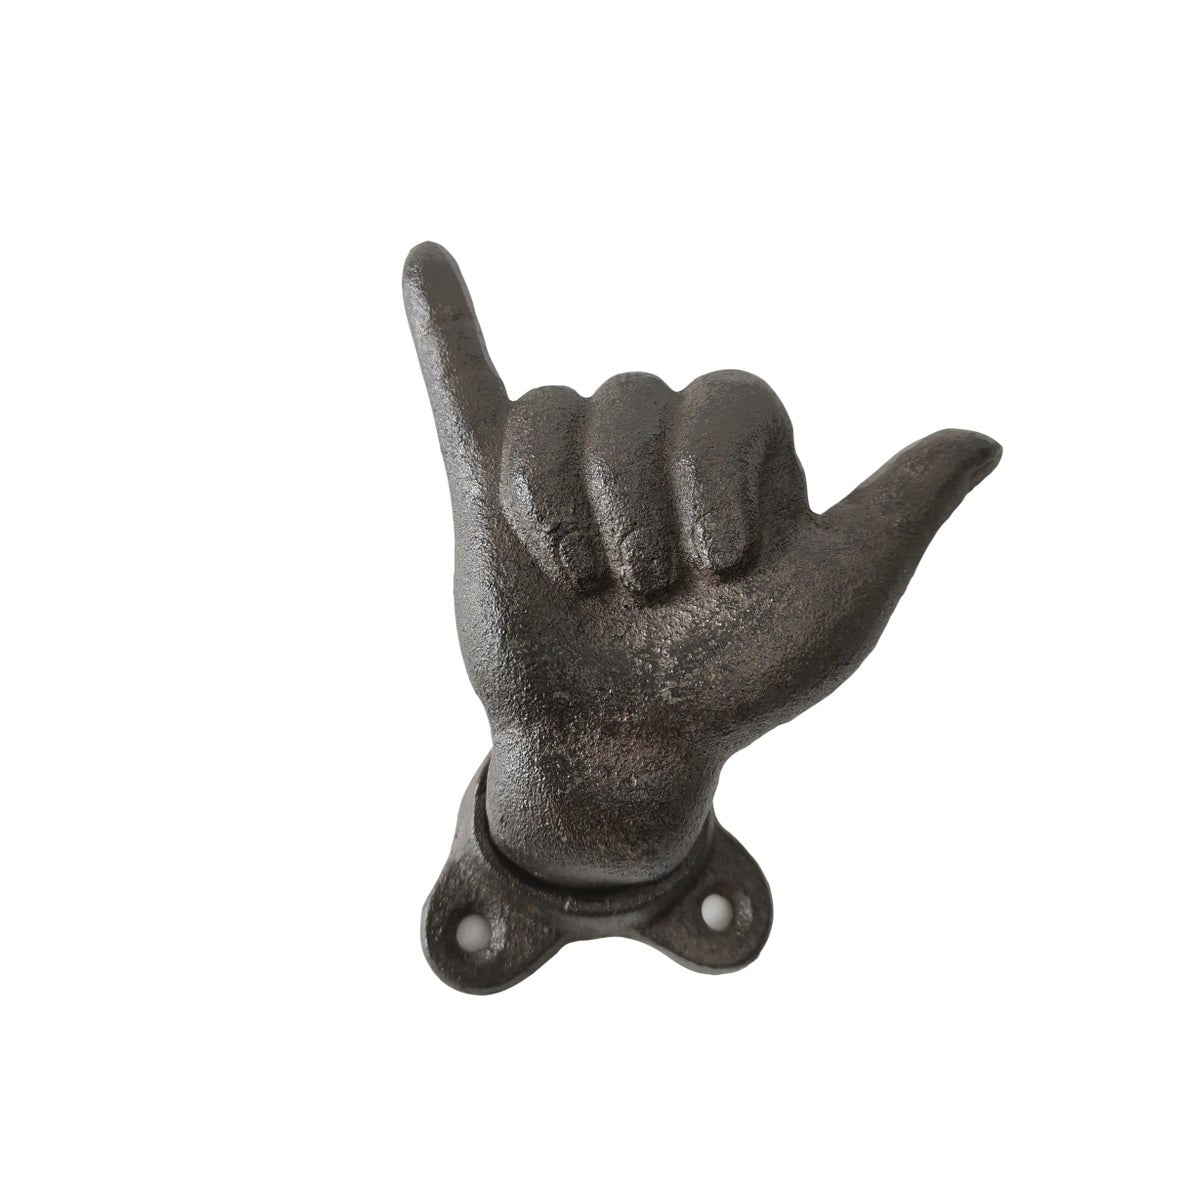 Hand Gesture Wall Hooks - Iron Accents, finger hook 